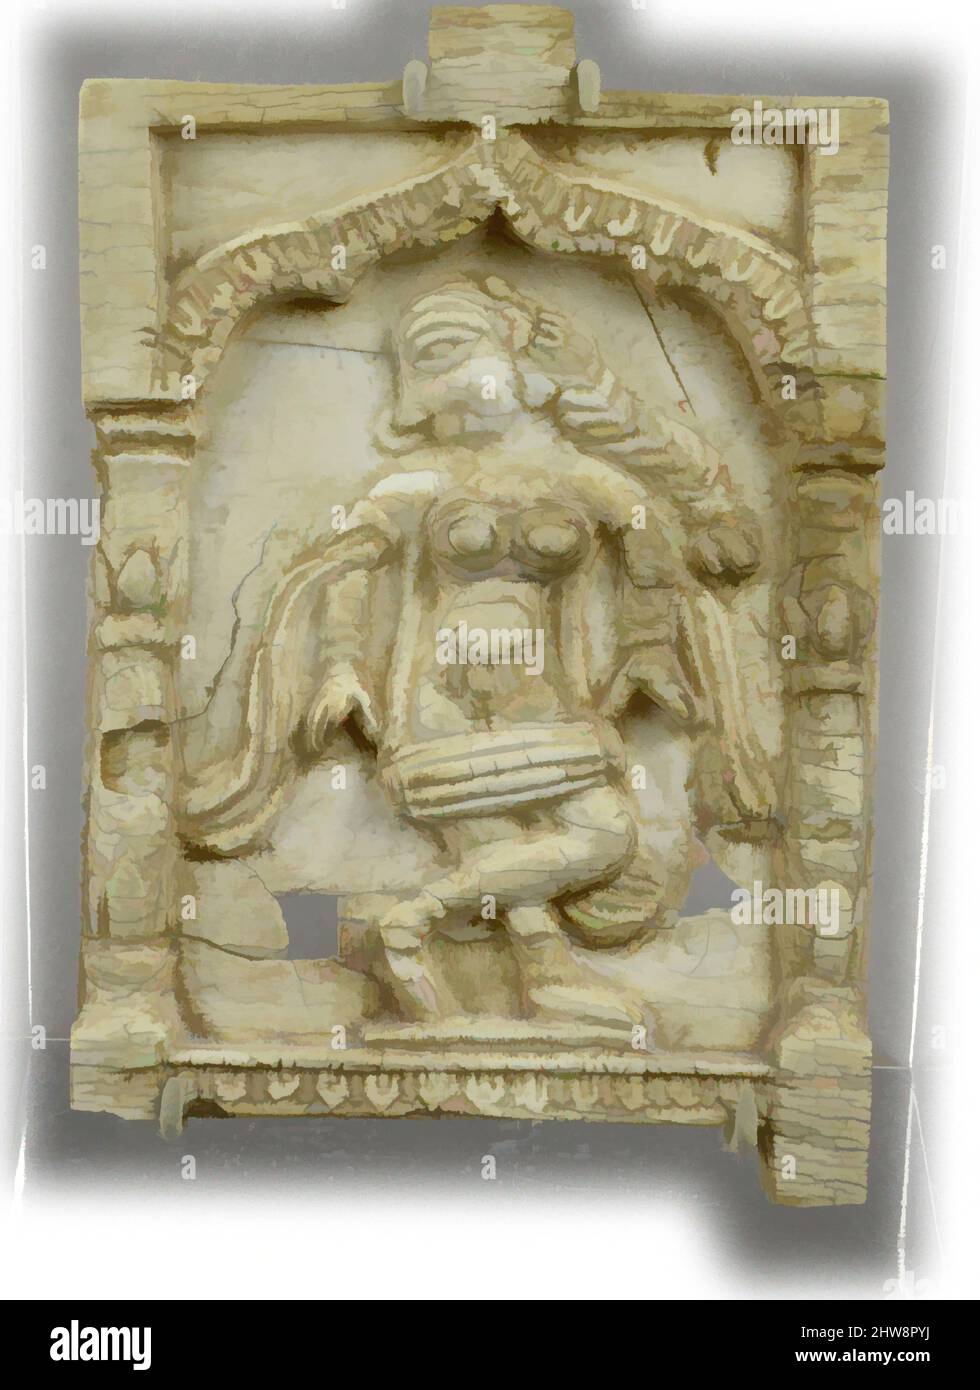 Art inspired by Furniture Plaque Showing Female Musician in an Architectural Framework, 16th century, From India, possibly Deccan, Ivory, H. 3 1/8 in (7.9cm), Ivories and Bone, This small plaque depicts a woman mid-dance step, playing a cylindrical drum known as the pakhavaj, which is, Classic works modernized by Artotop with a splash of modernity. Shapes, color and value, eye-catching visual impact on art. Emotions through freedom of artworks in a contemporary way. A timeless message pursuing a wildly creative new direction. Artists turning to the digital medium and creating the Artotop NFT Stock Photo